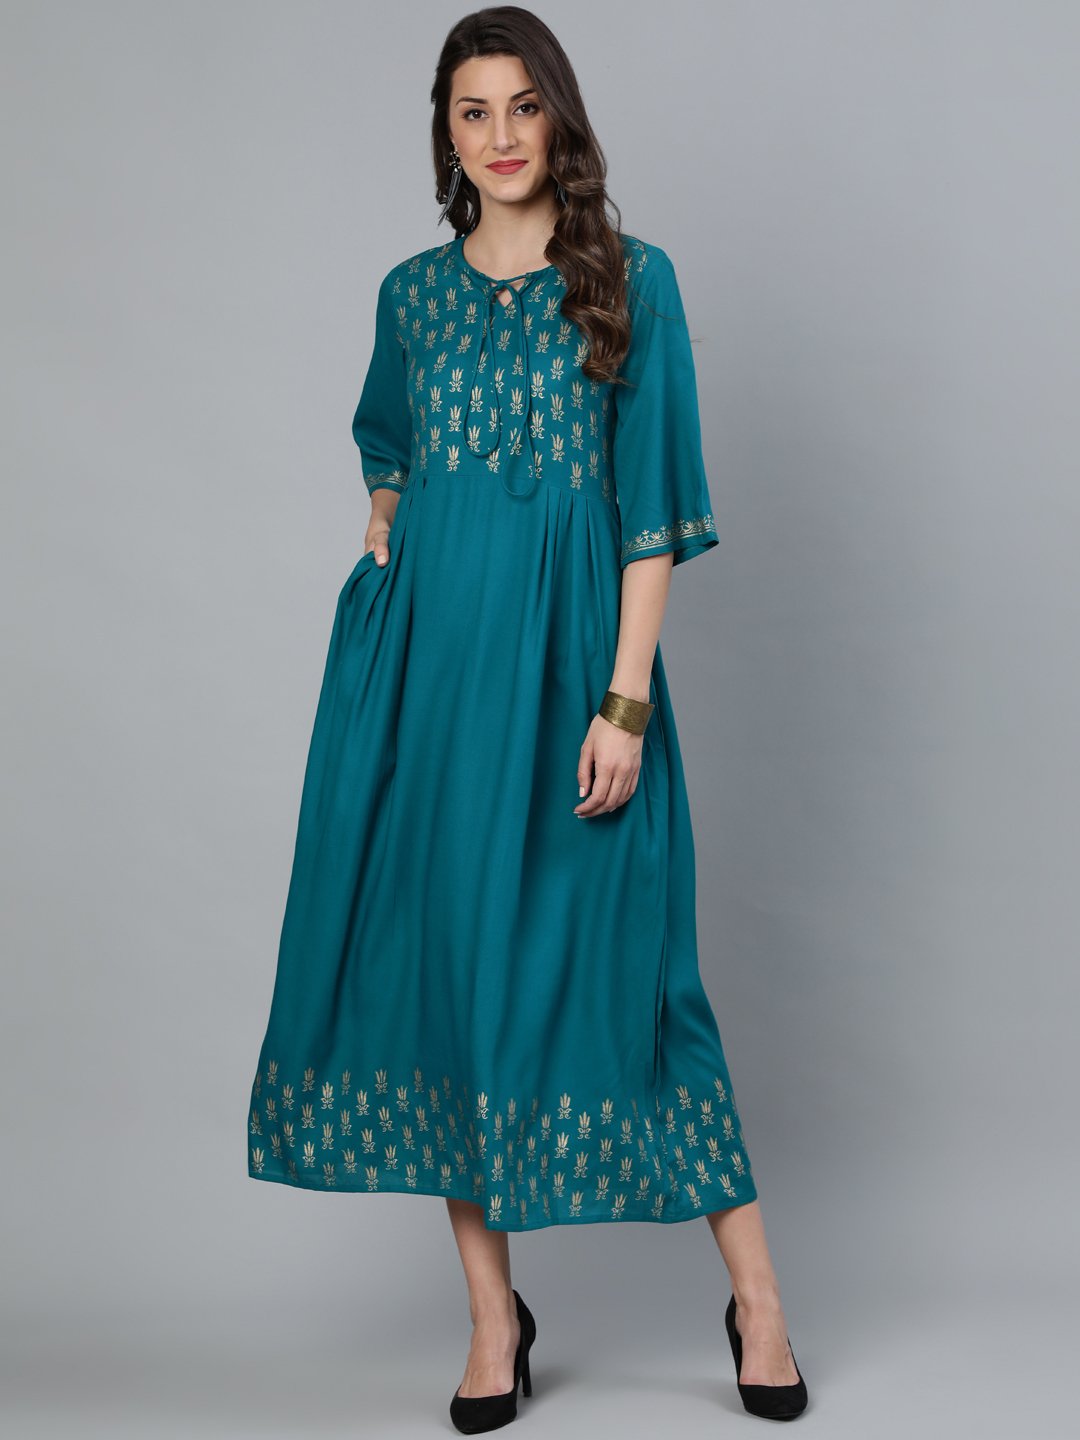 Women's Green & Gold Block Printed Dress With Three Quarter Sleeves - Nayo Clothing